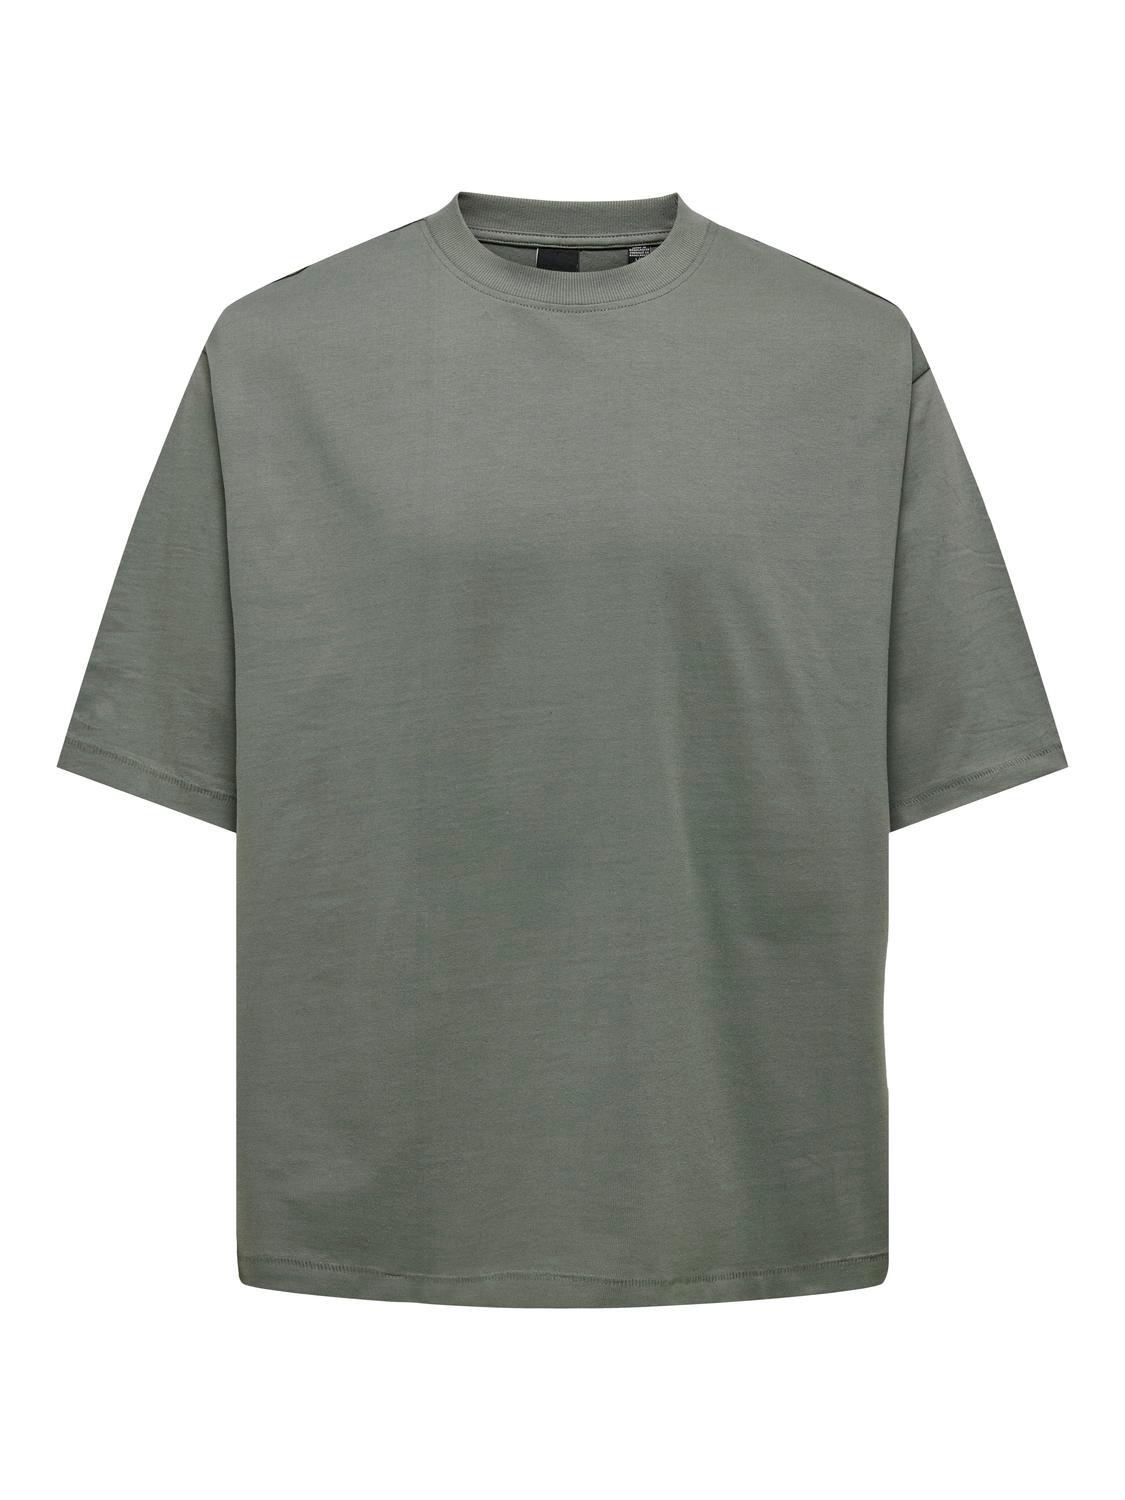 ONLY & SONS O-hals t-shirt  -Castor Gray - 22027787